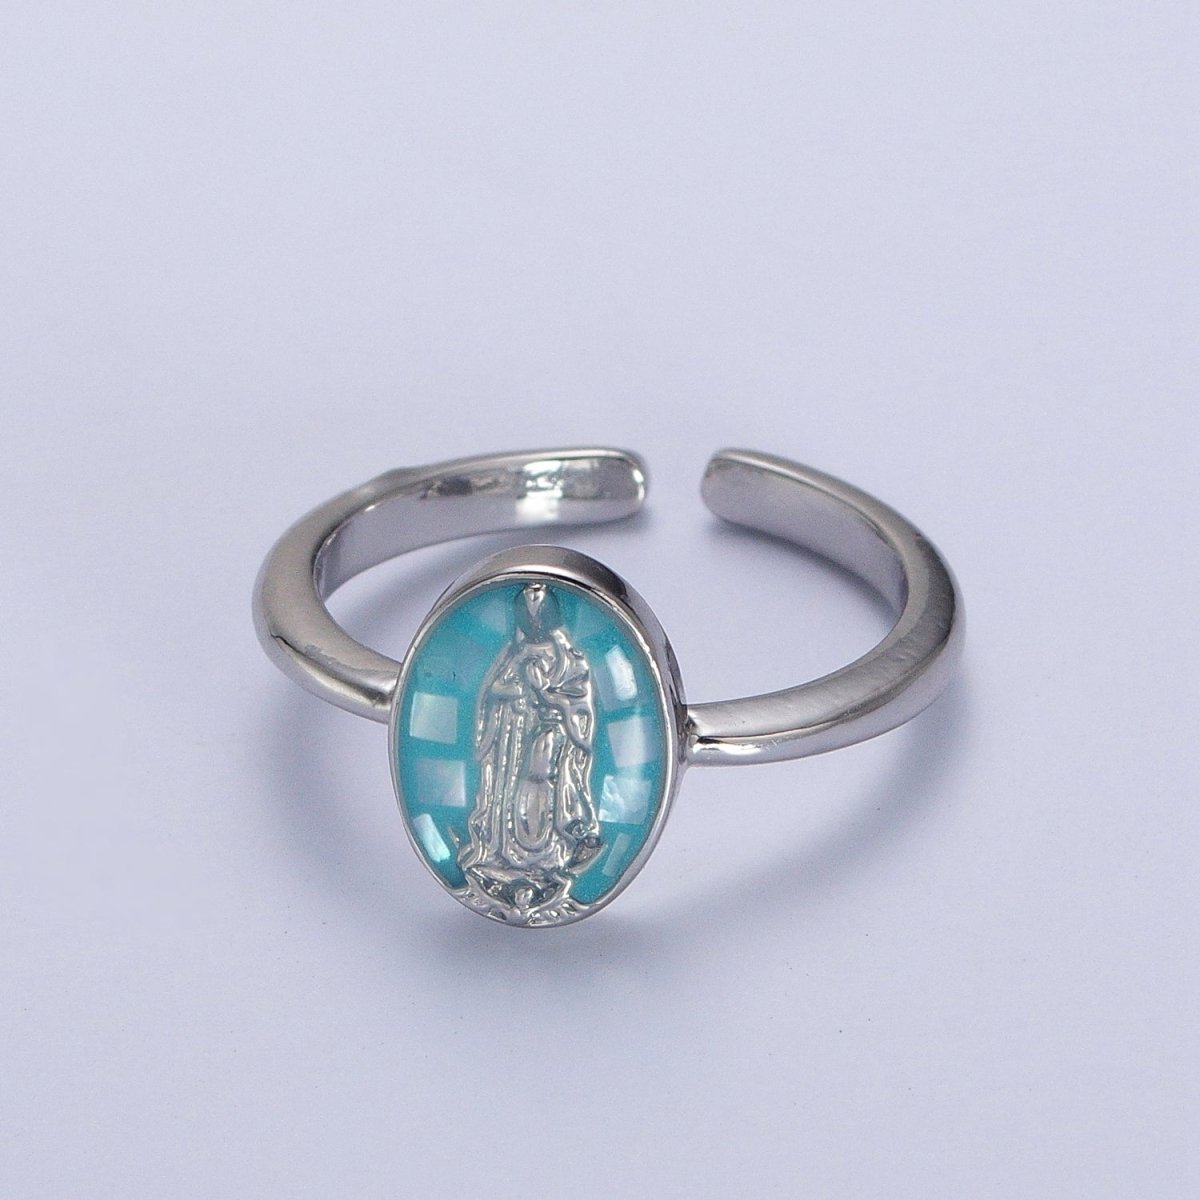 Gold Filled Oval Virgin Mother Mary Shell Opal Ring in Gold & Silver S-397 - S-400, Y-489 - Y-494 - DLUXCA